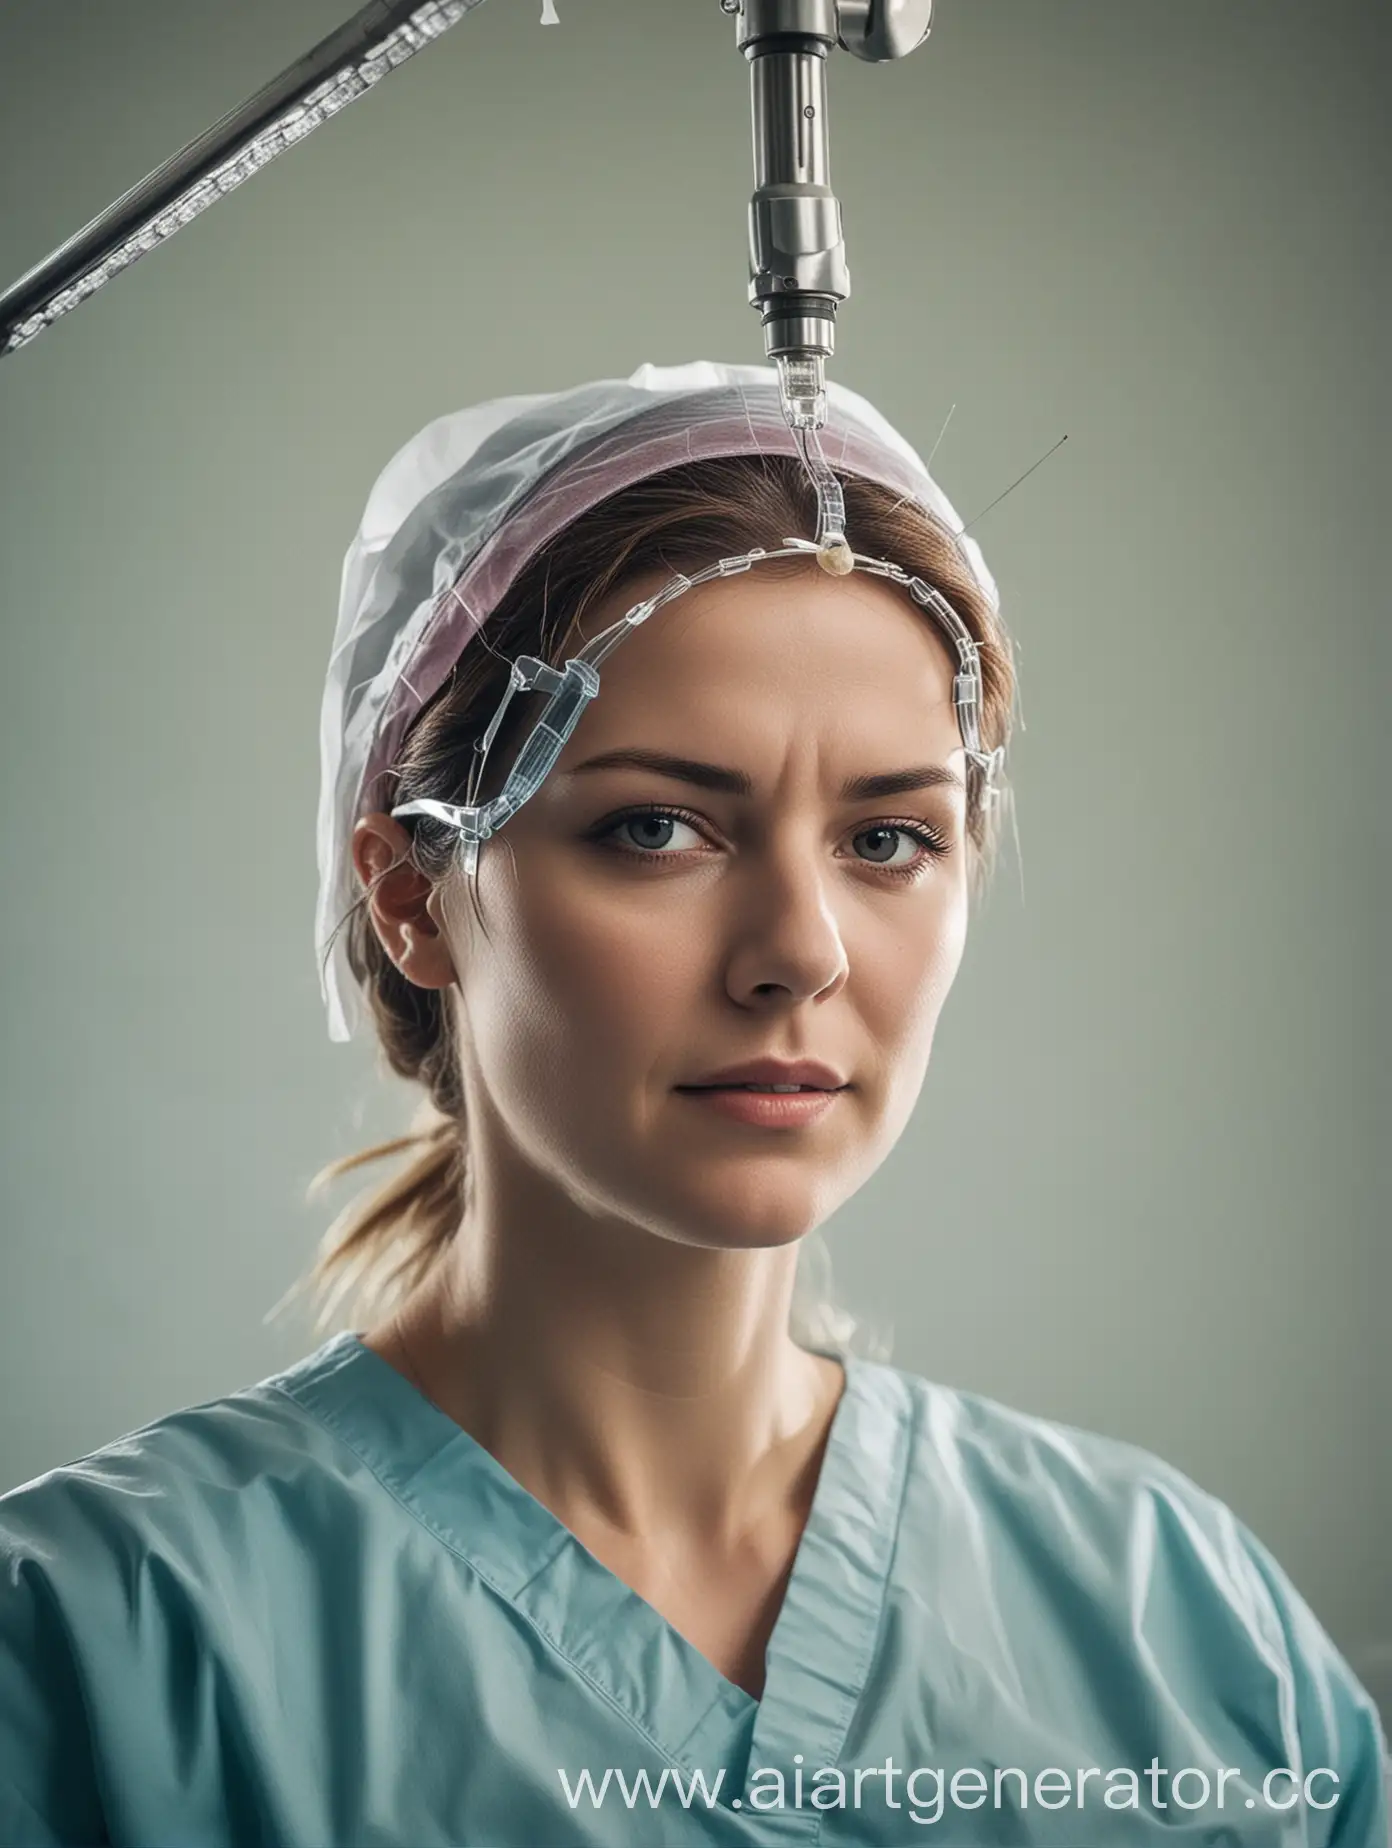 A female surgeon who is performing brain surgery